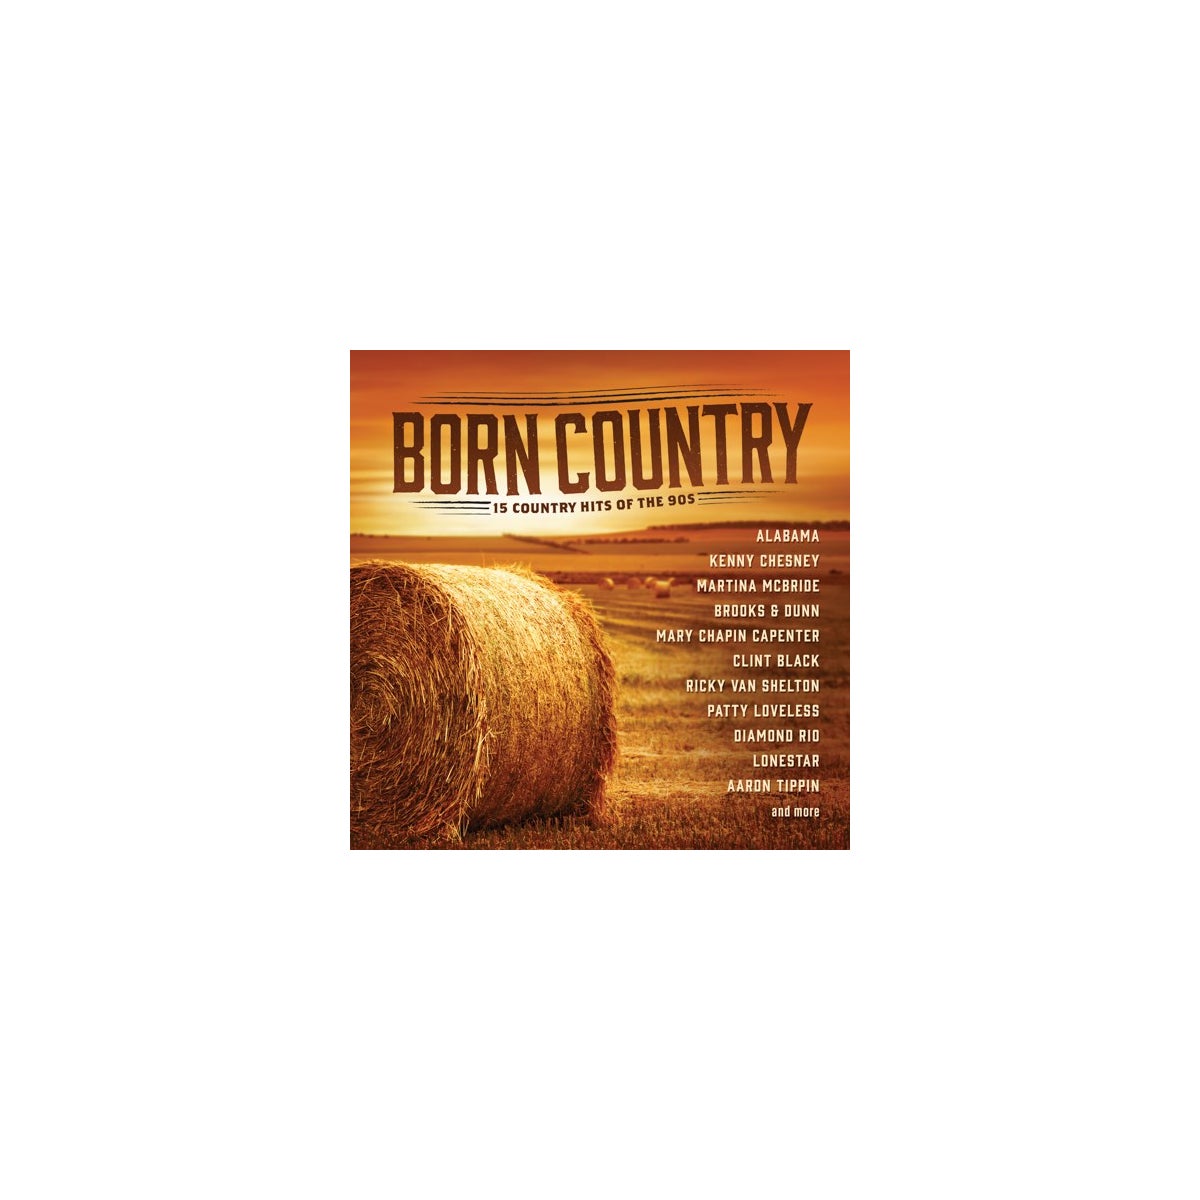 BORN COUNTRY: COUNTRY HITS OF THE 90S